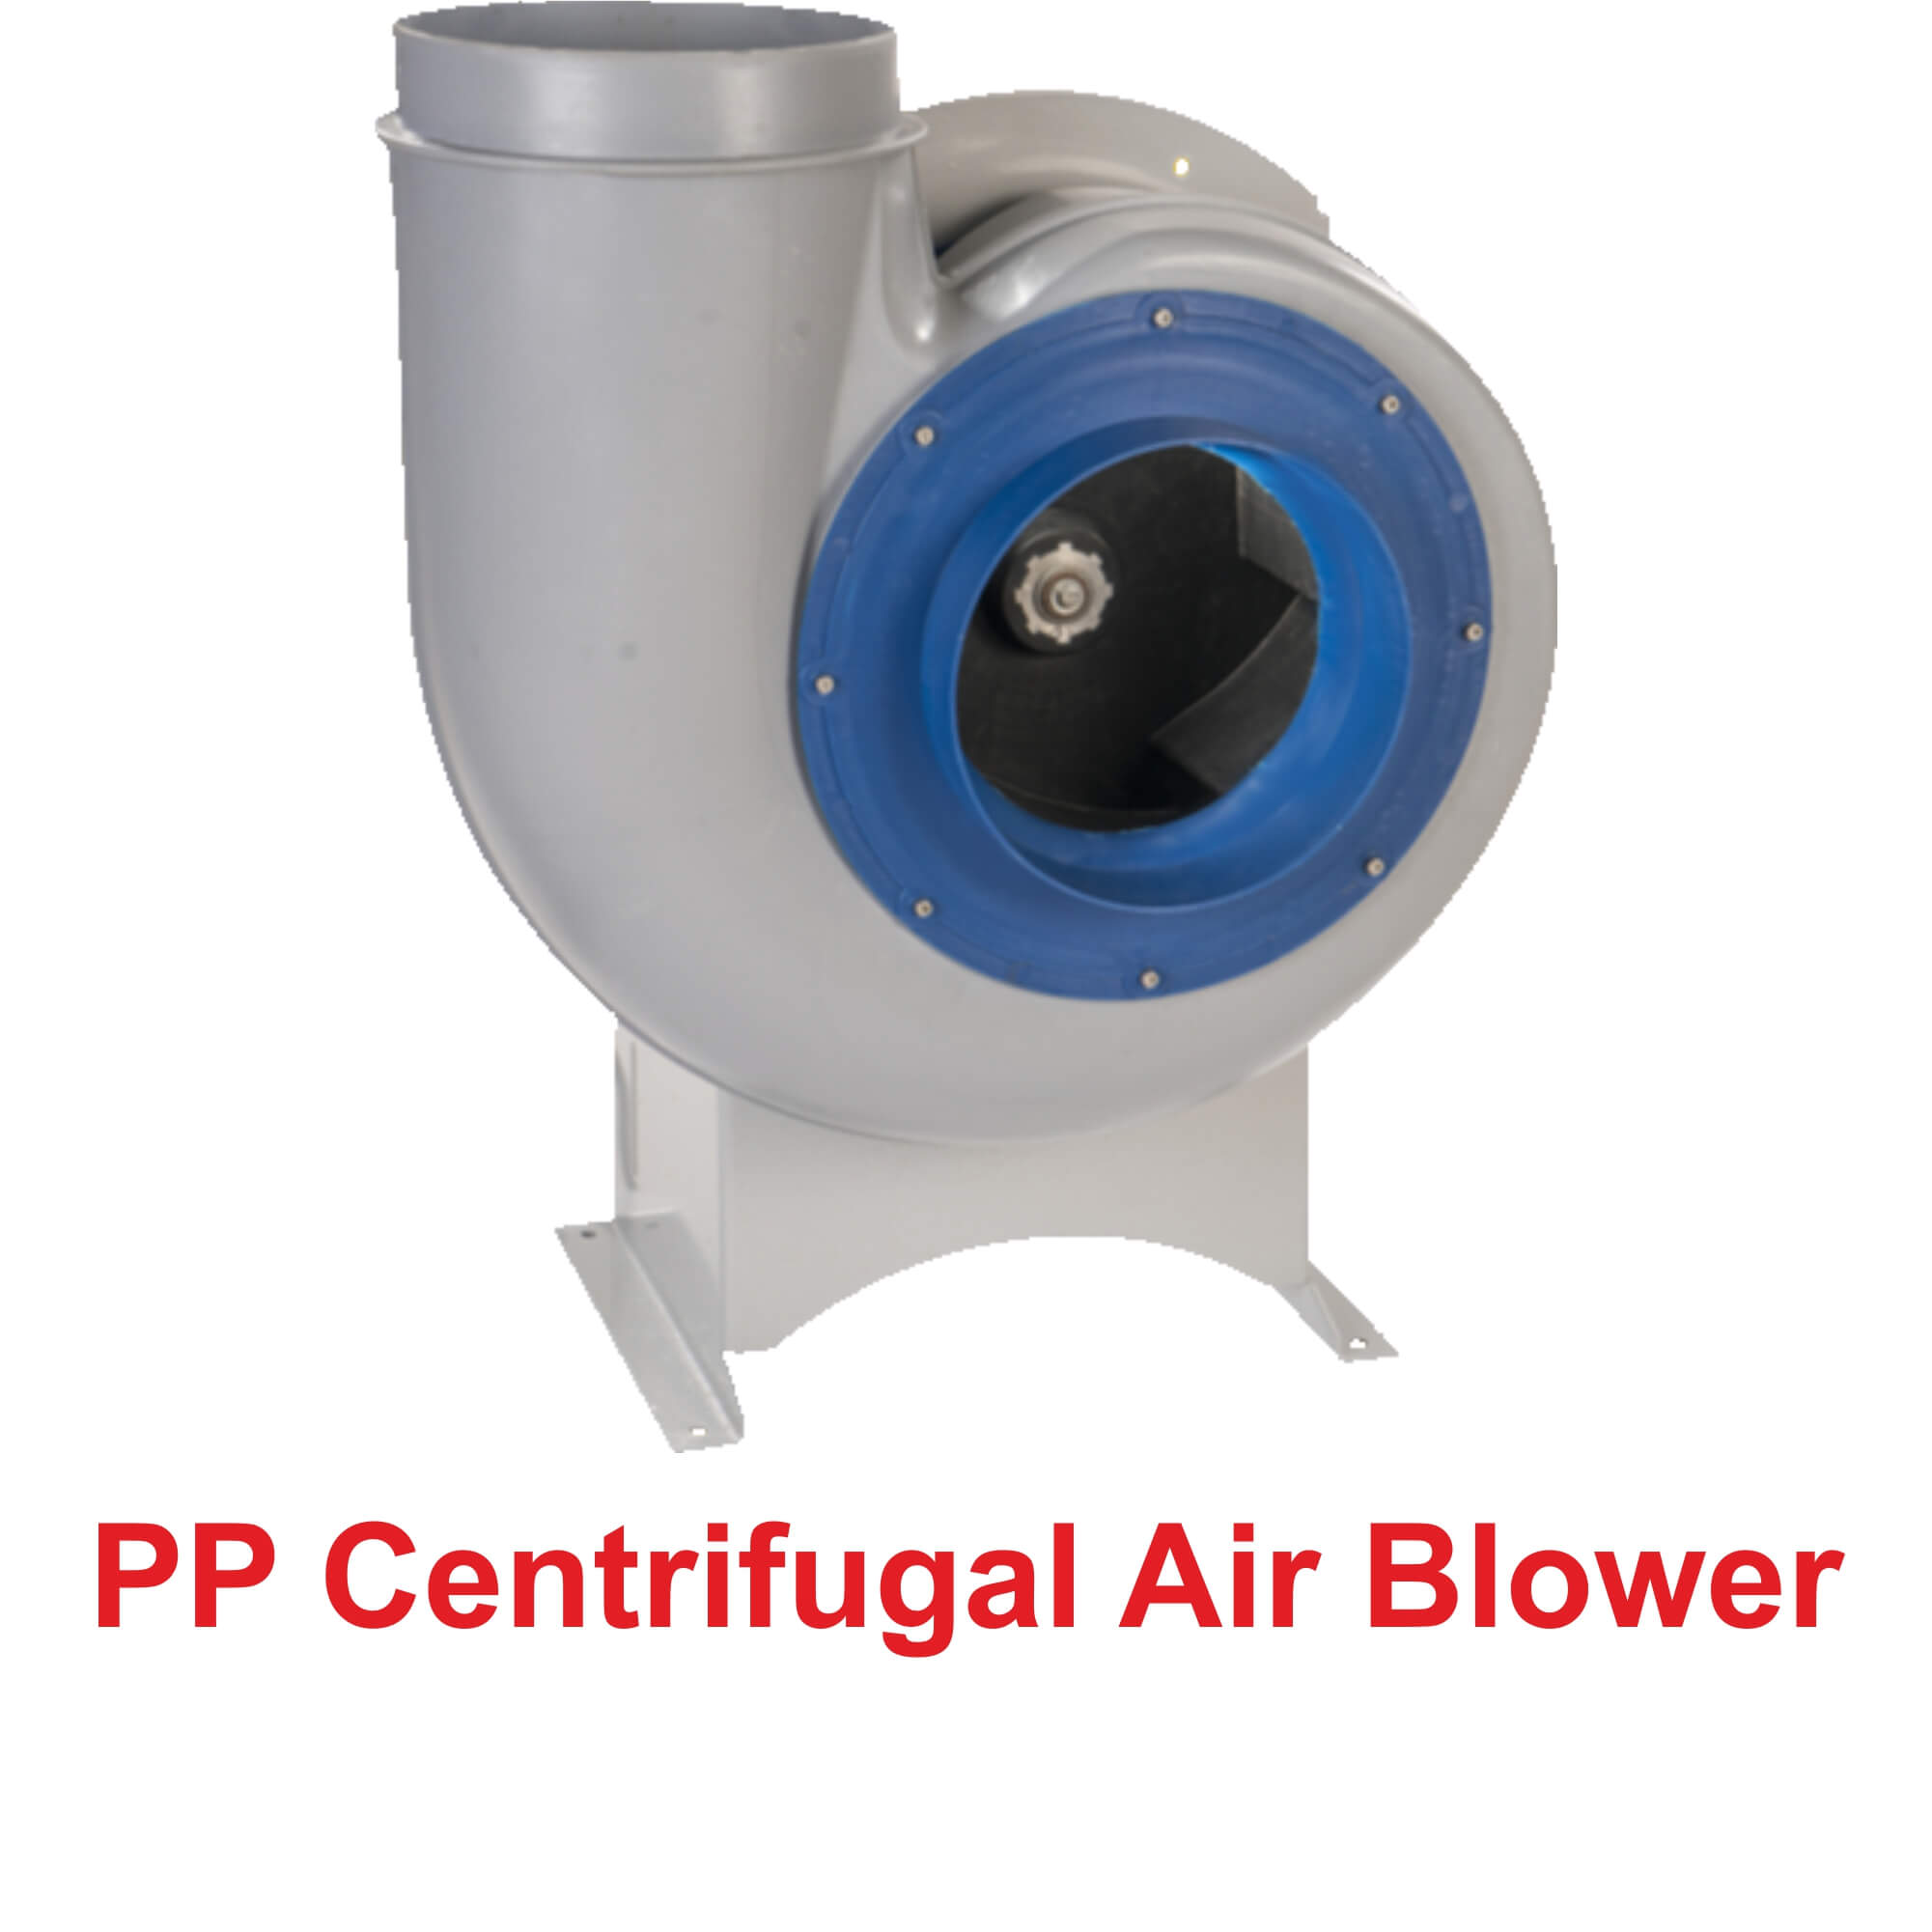 PP Centrifugal Air Blower Manufacturer in India